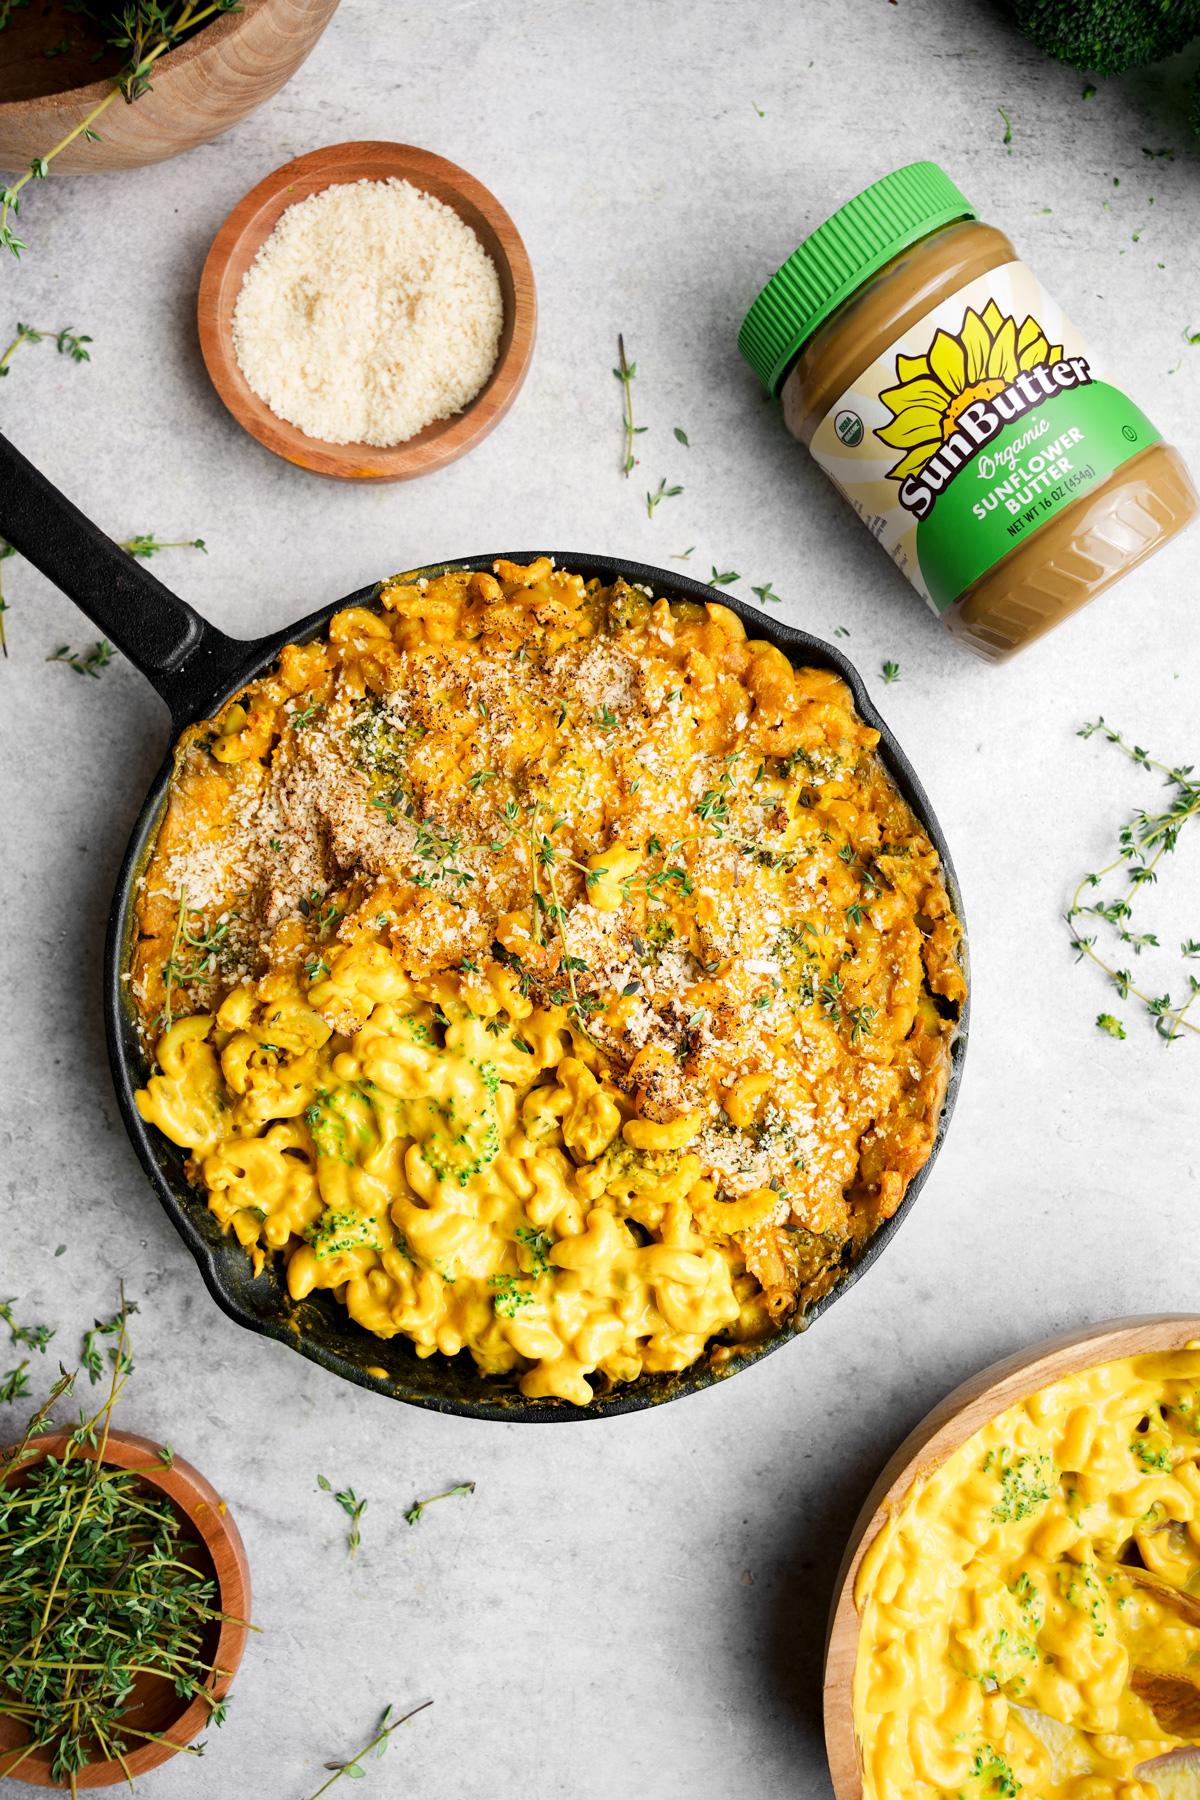 the nut free vegan mac and cheese with the sunbutter container and fresh thyme